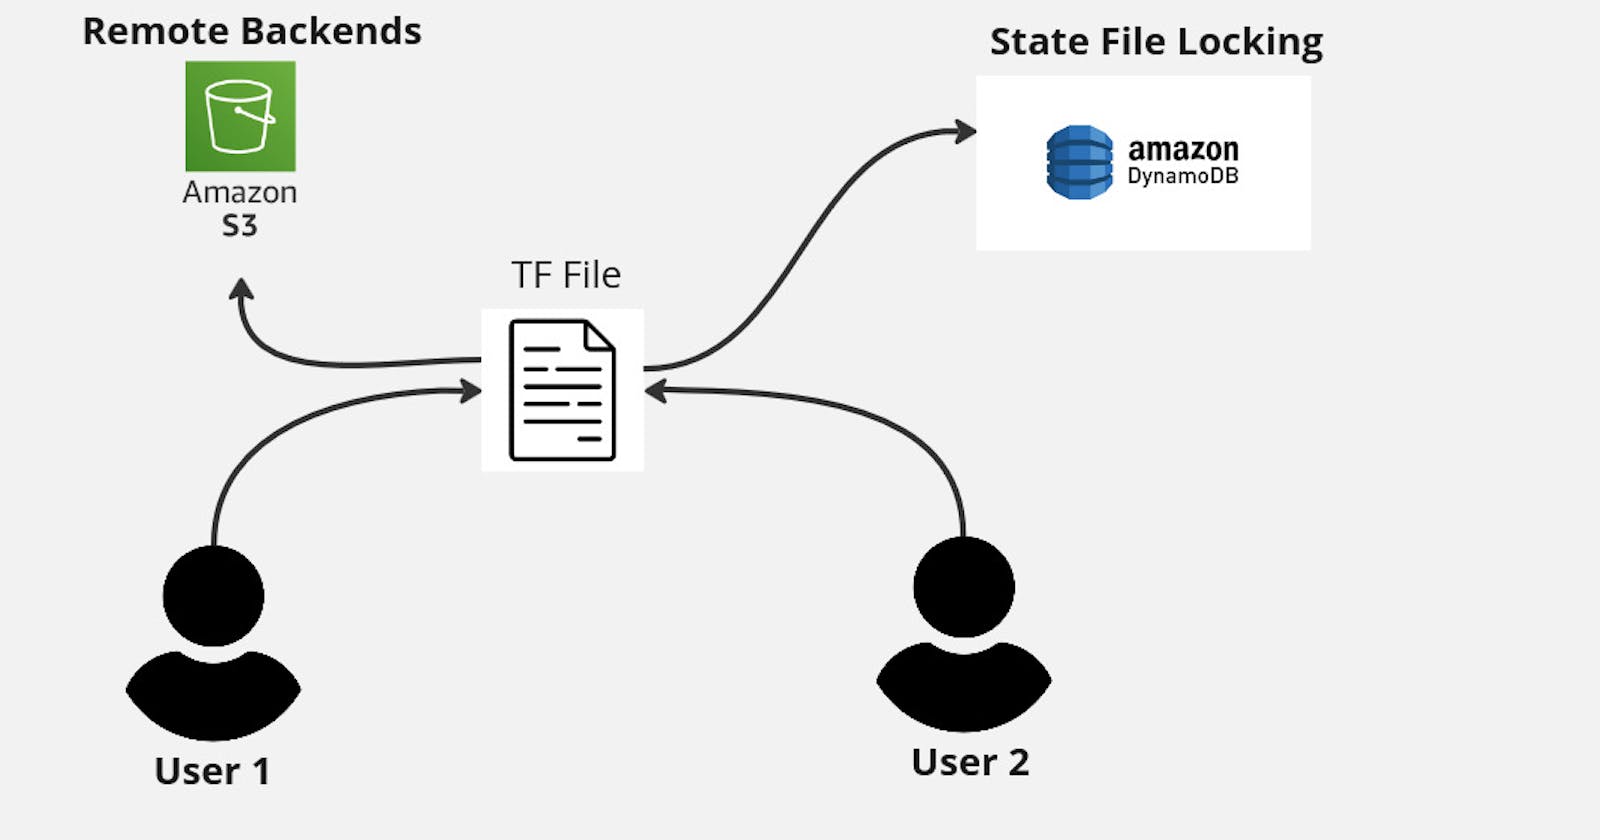 Remote Backends and State File Locking in Terraform